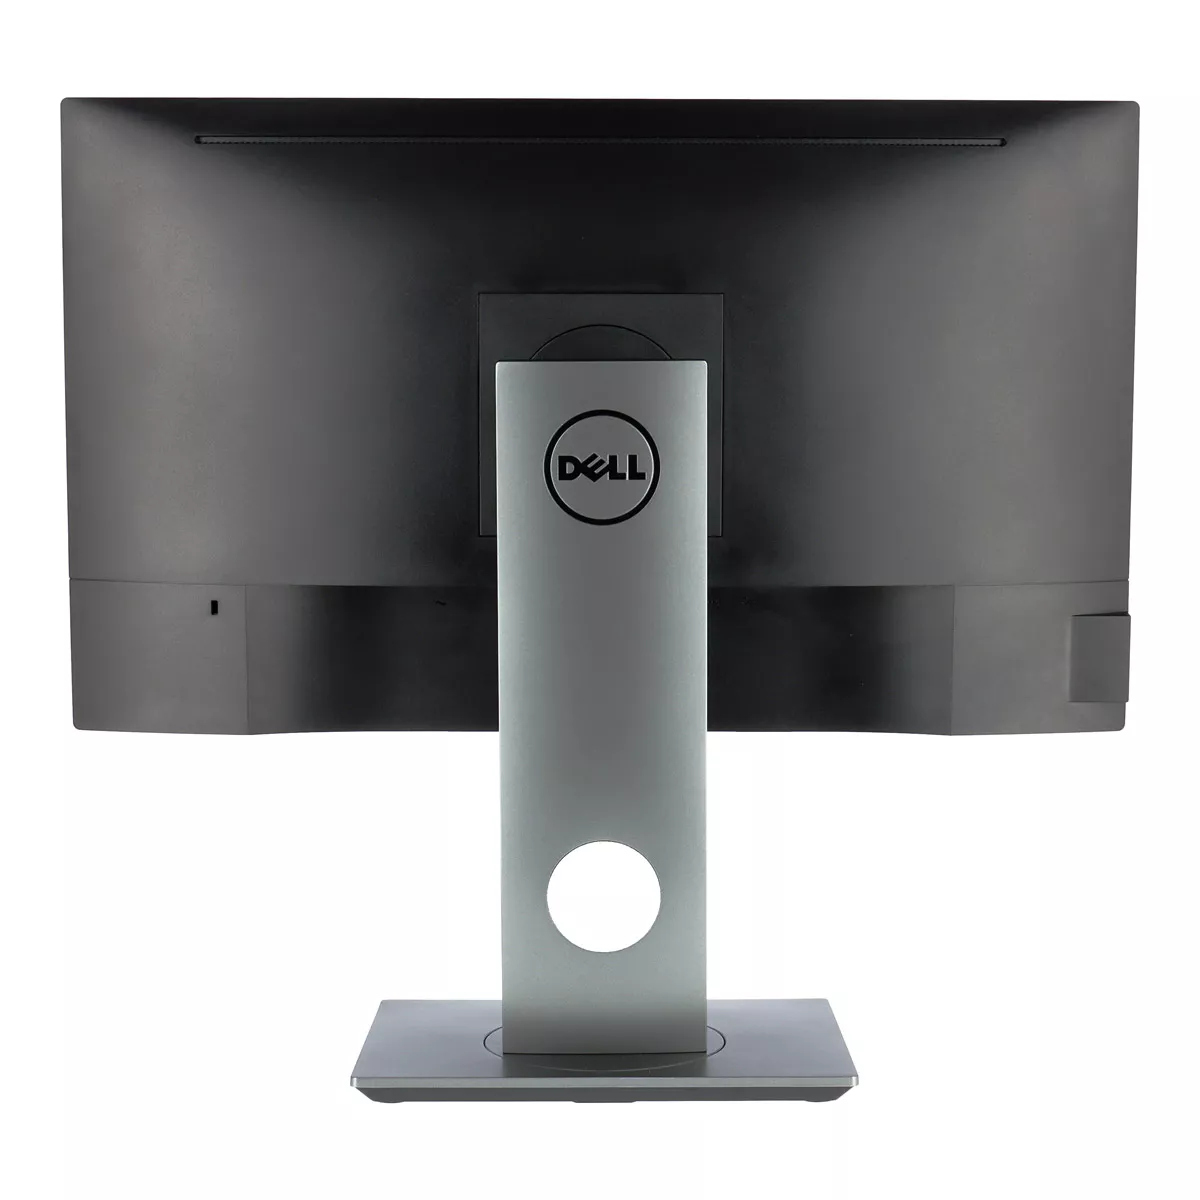 Dell P2417h 24 Zoll LED Schwarz A+